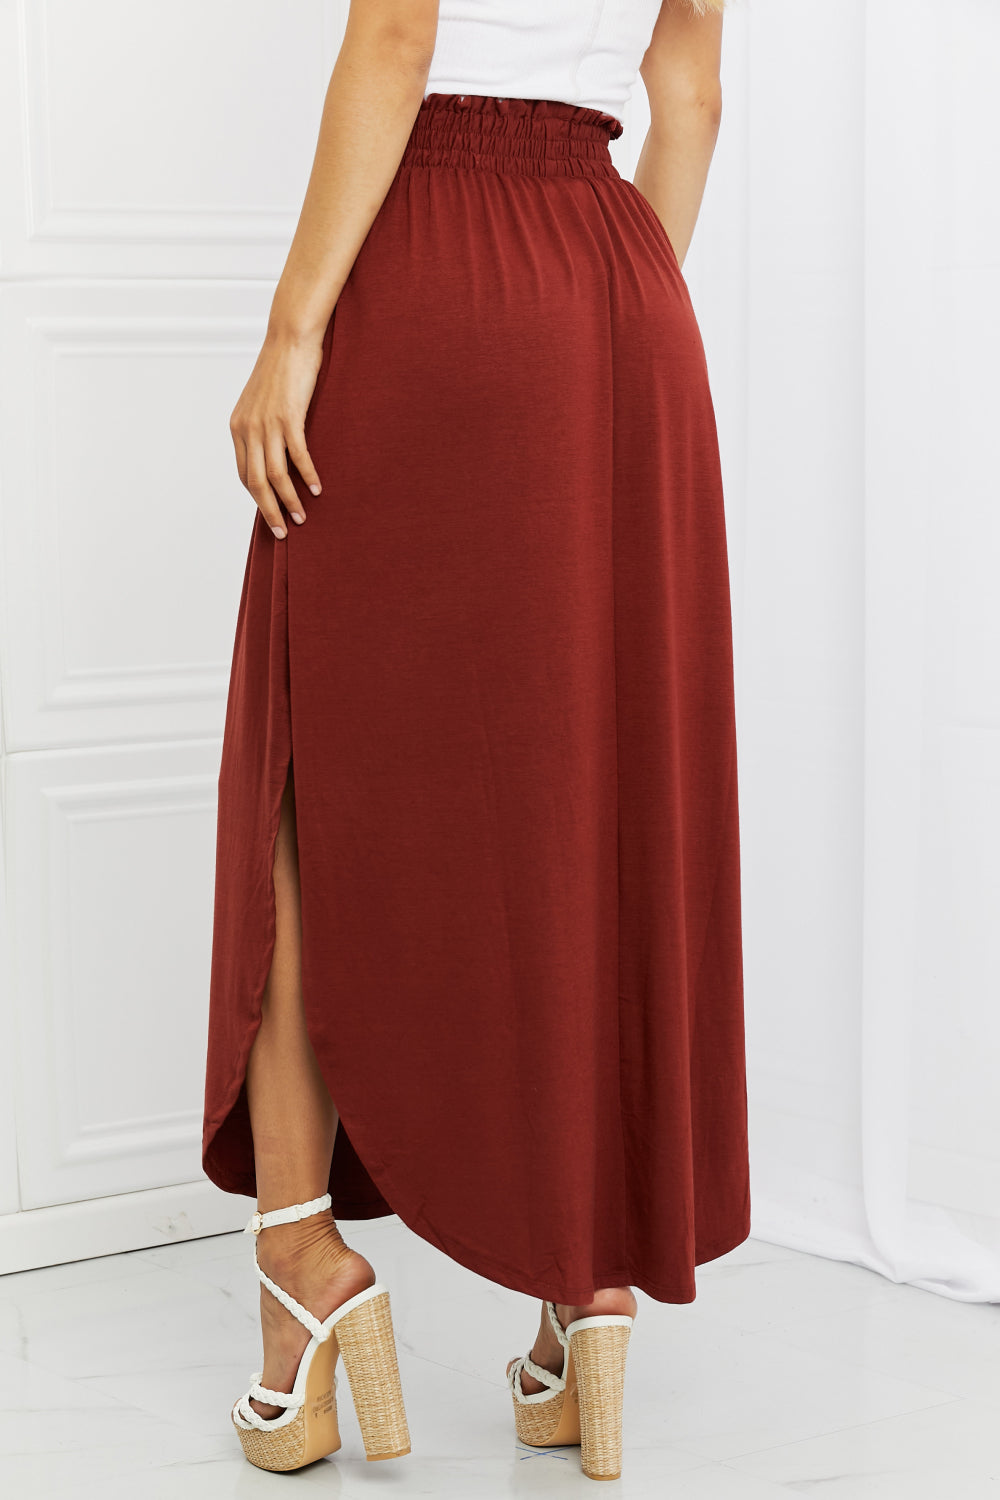 Zenana It's My Time Full Size Side Scoop Scrunch Skirt in Dark Rust  Southern Soul Collectives 